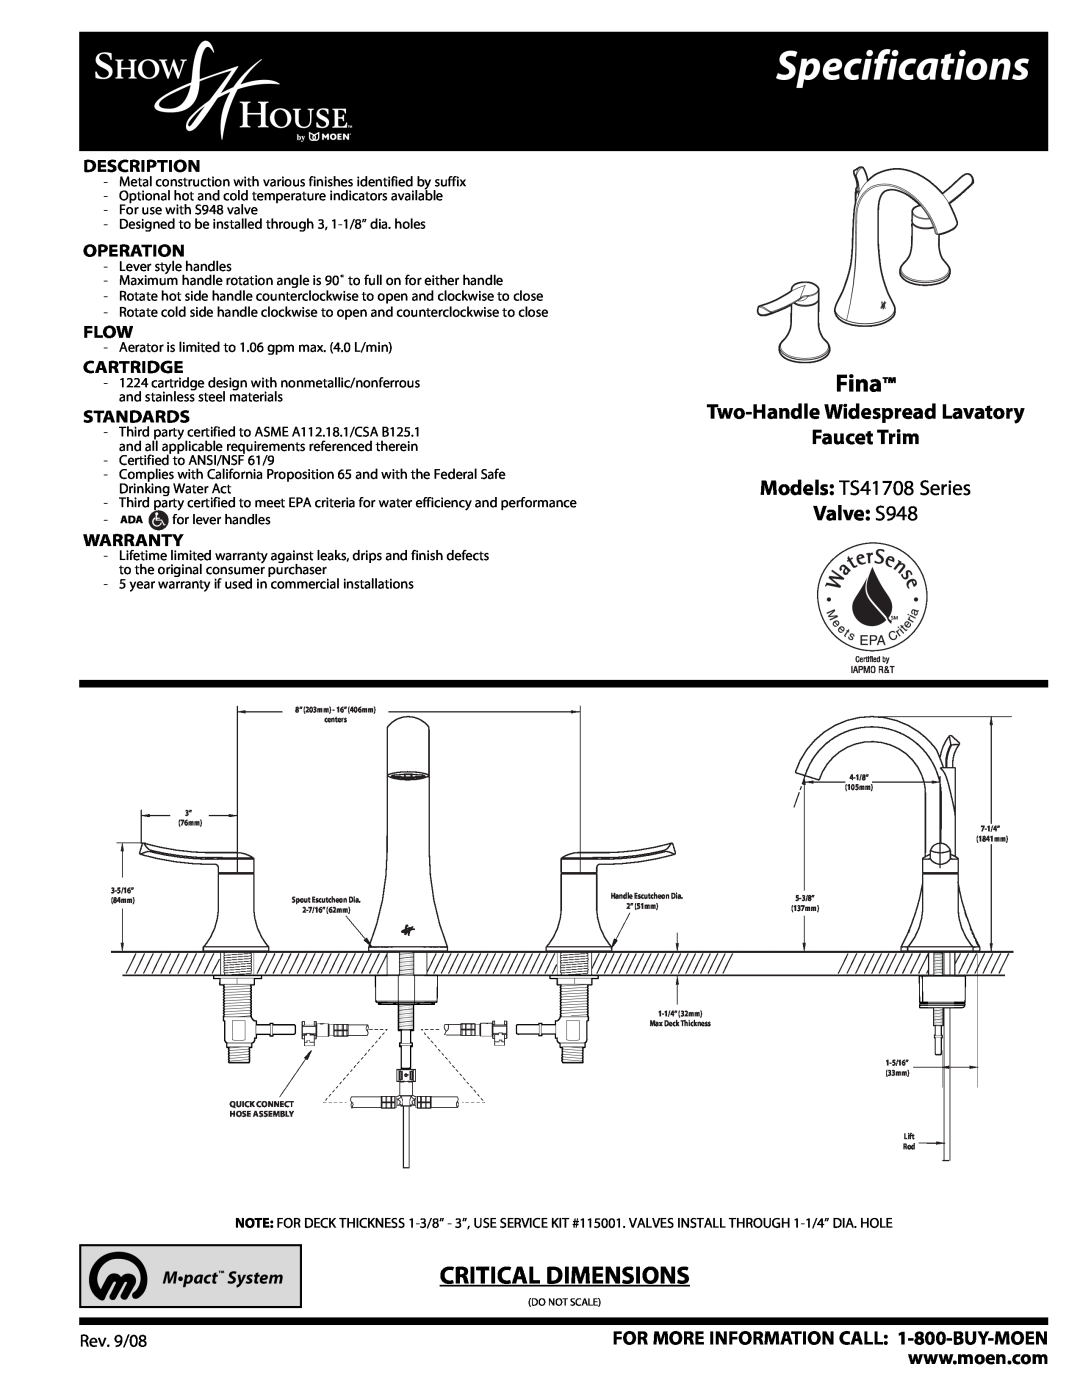 Moen specifications Specifications, Fina, Critical Dimensions, Two-Handle Widespread Lavatory Faucet Trim, Valve S948 